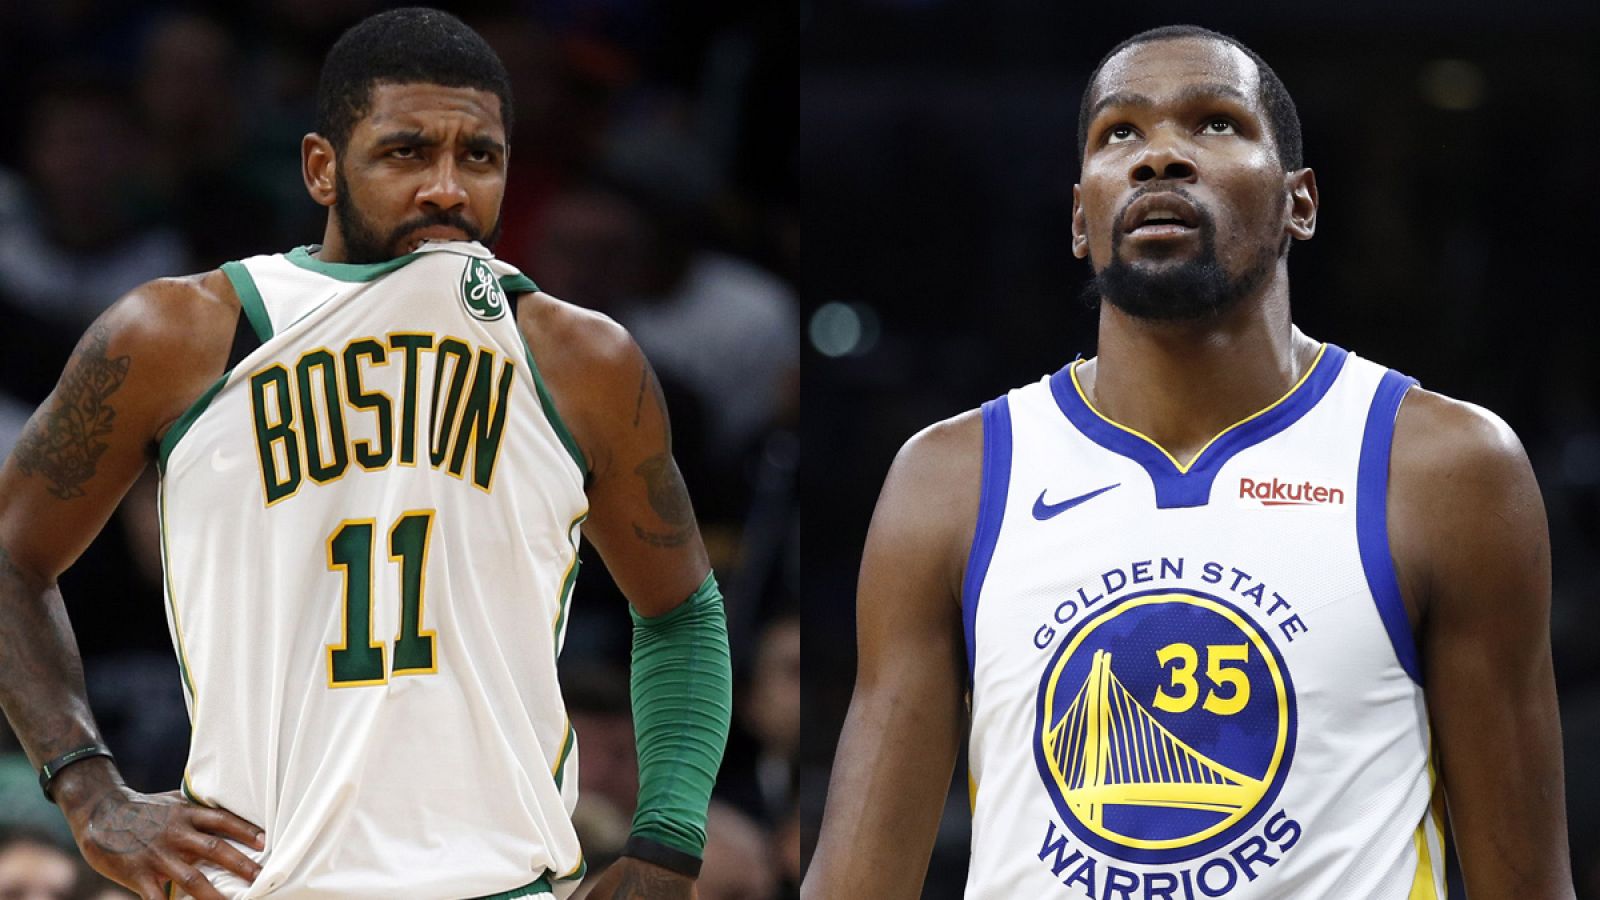 Kyrie Irving (Boston Celtics) y Kevin Durant (Golden State Warriors)